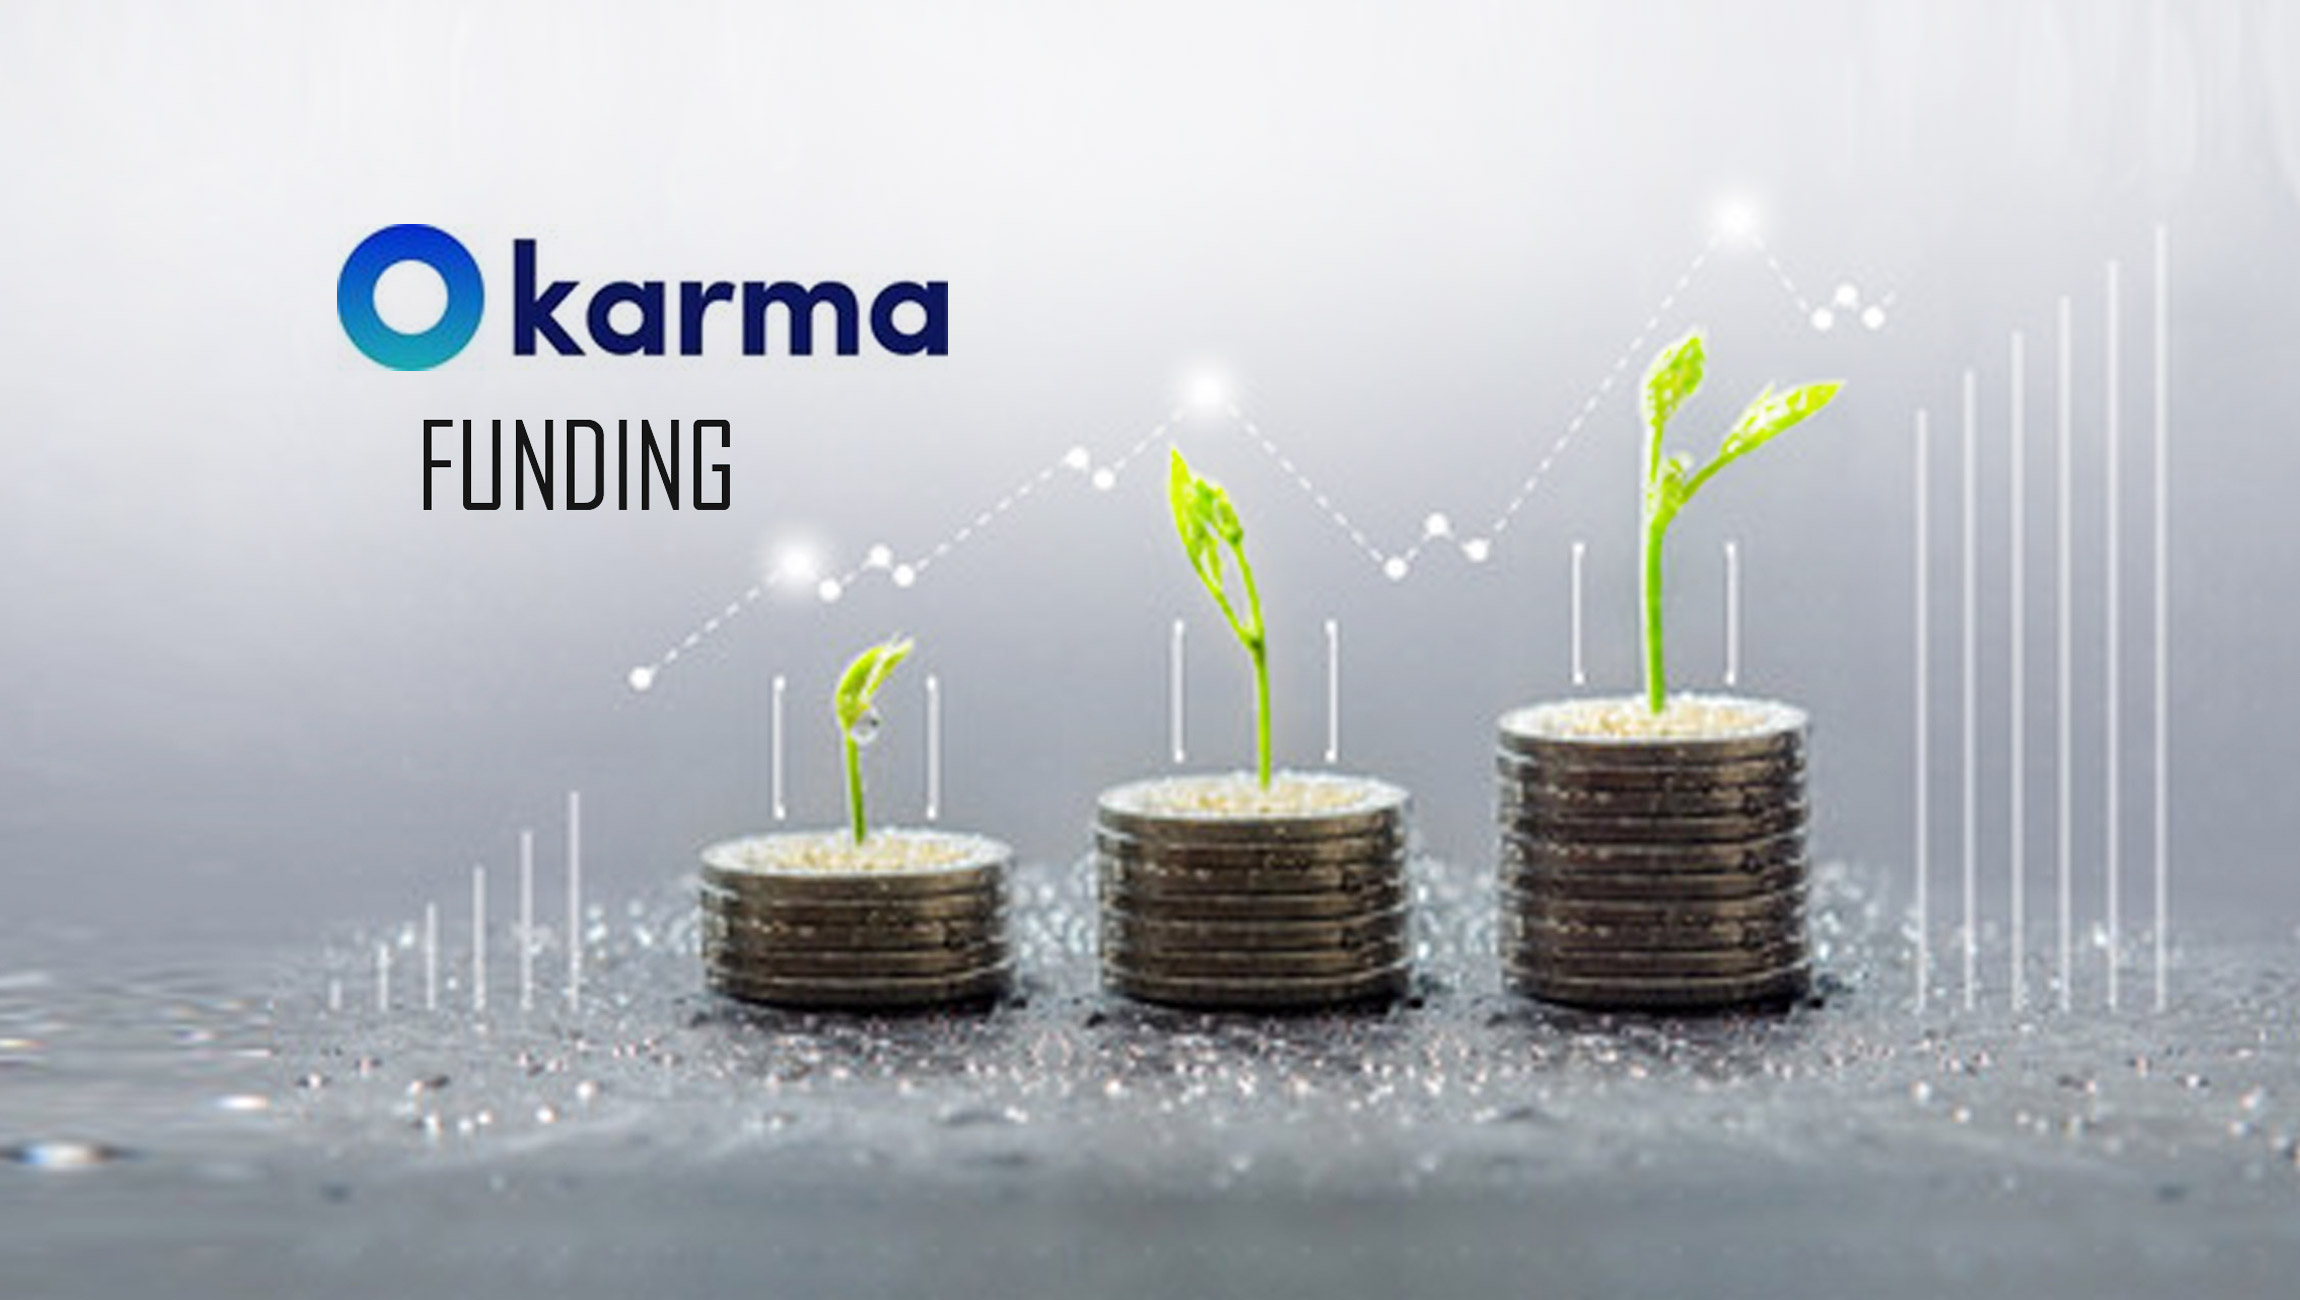 Karma---The-Browser-Based-AI-Shopping-Assistant---Closes-_25M-Series-A-Funding-Round-Led-By-Target-Global-And-Moretech-Ventures